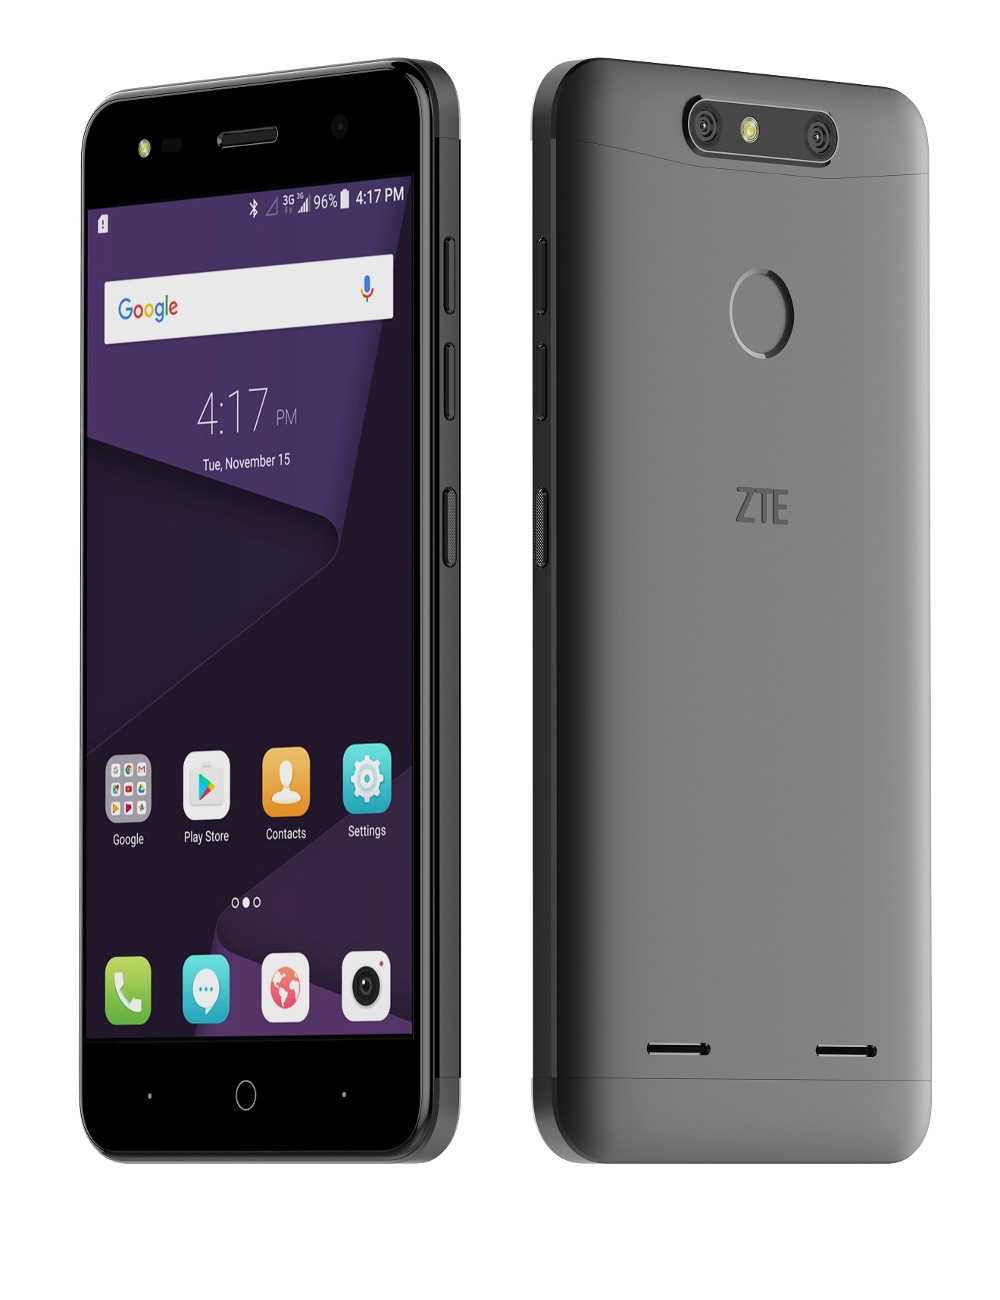 ZTE Blade V8 Mini - specification of a budget phone